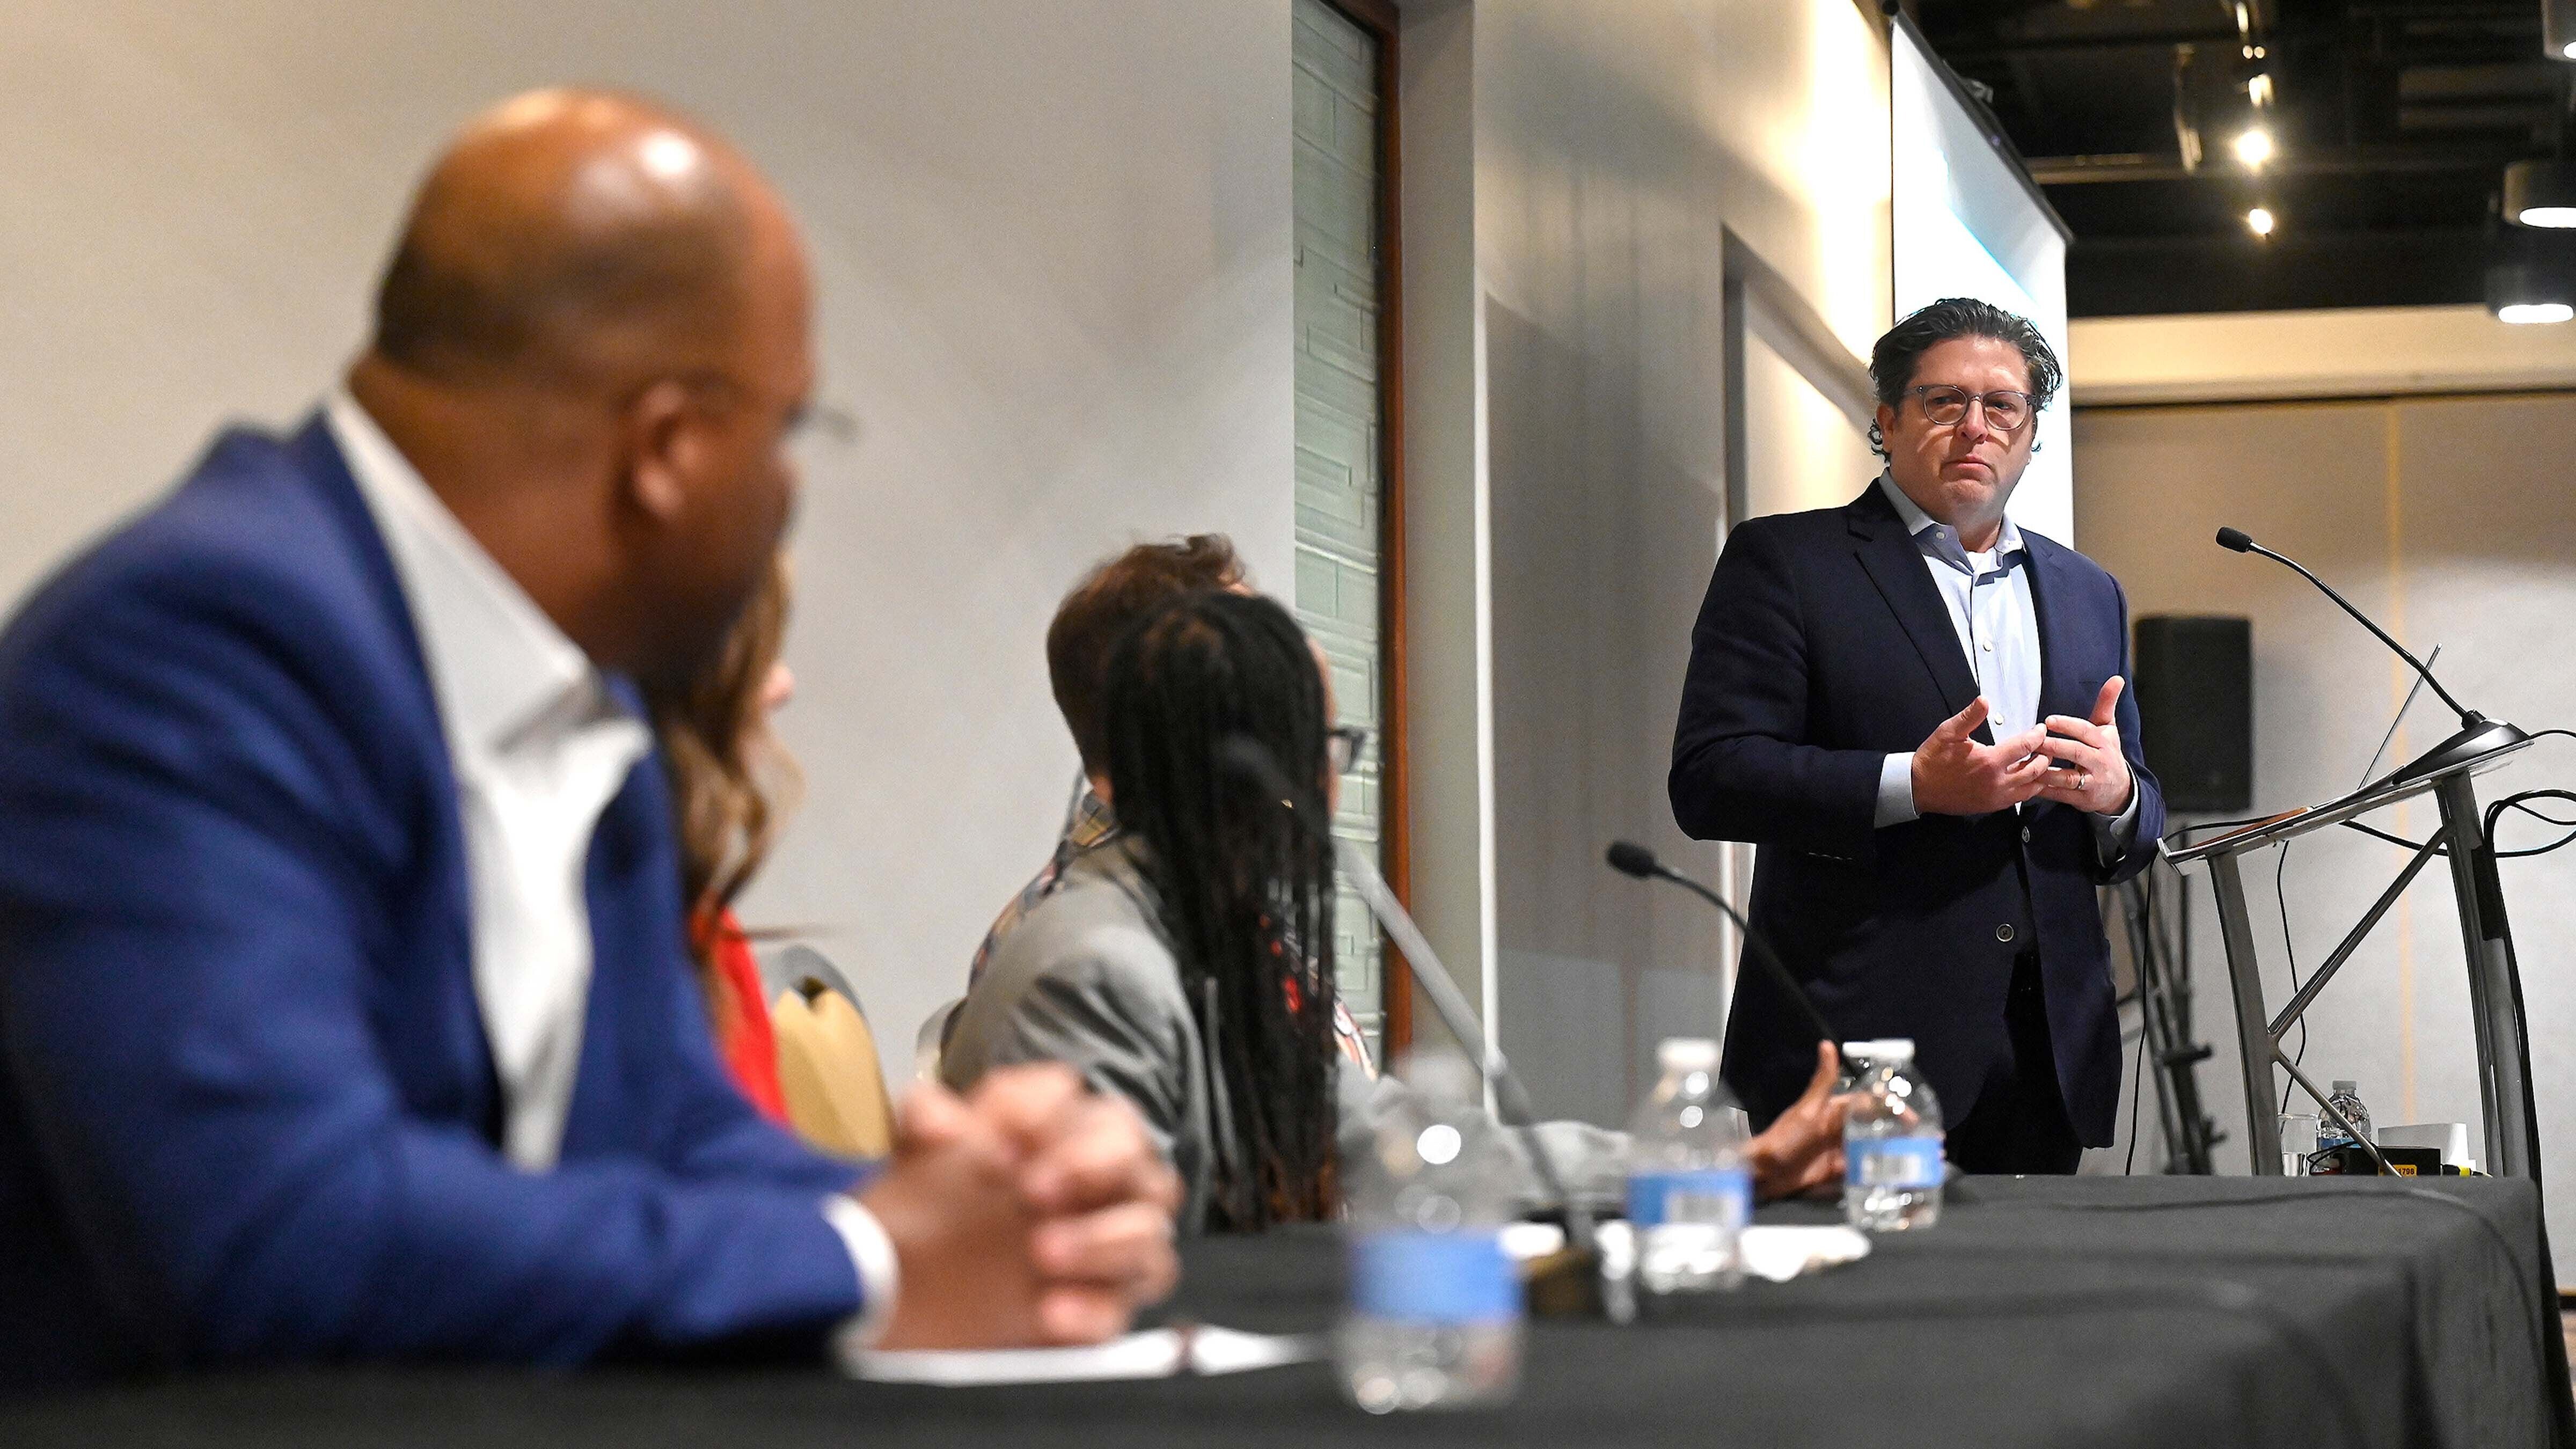 Matt Summy, VP of Strategic Plannning for Impact & Inclusion at Comcast, moderated a panel on leveraging digital equity grants from a funders lens.